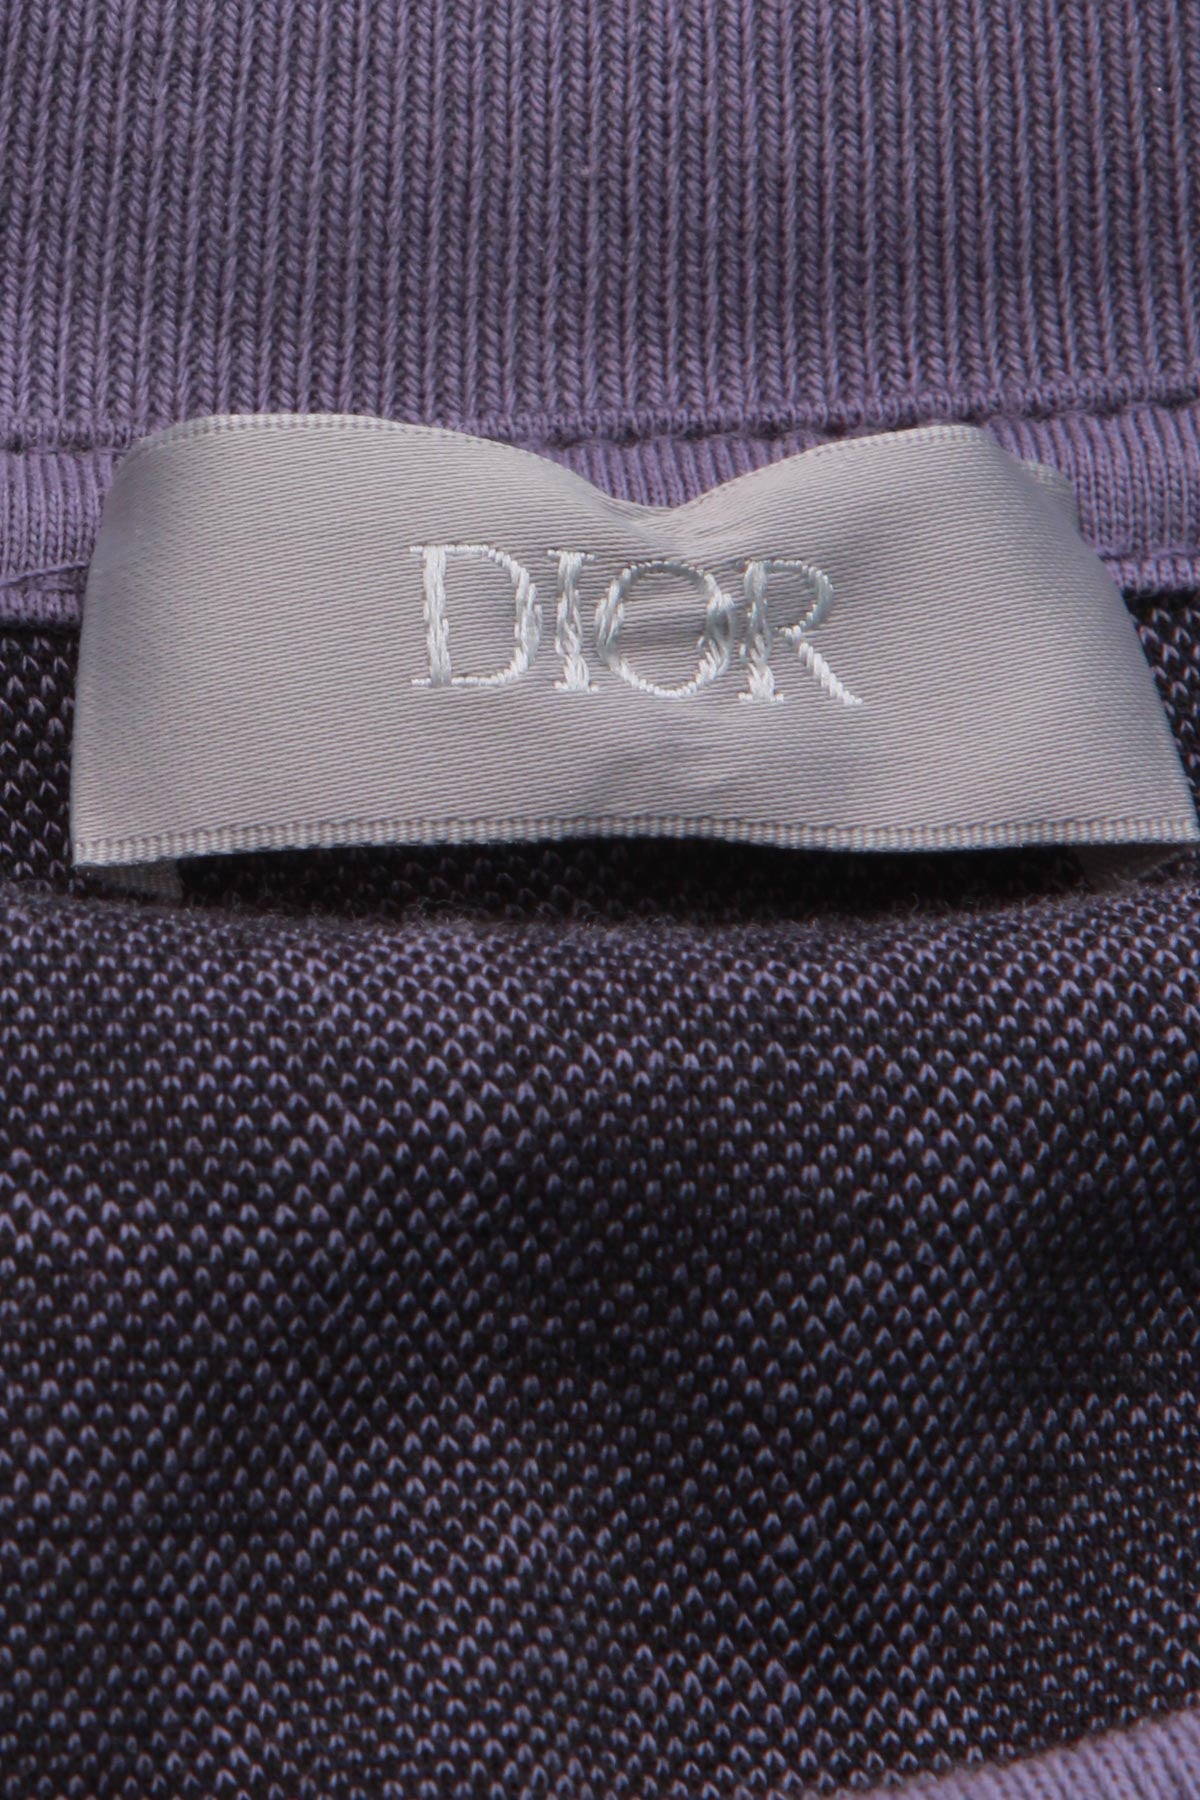 Men's Christian Dior Couture Sweatshirt, Relaxed Fit, DIOR